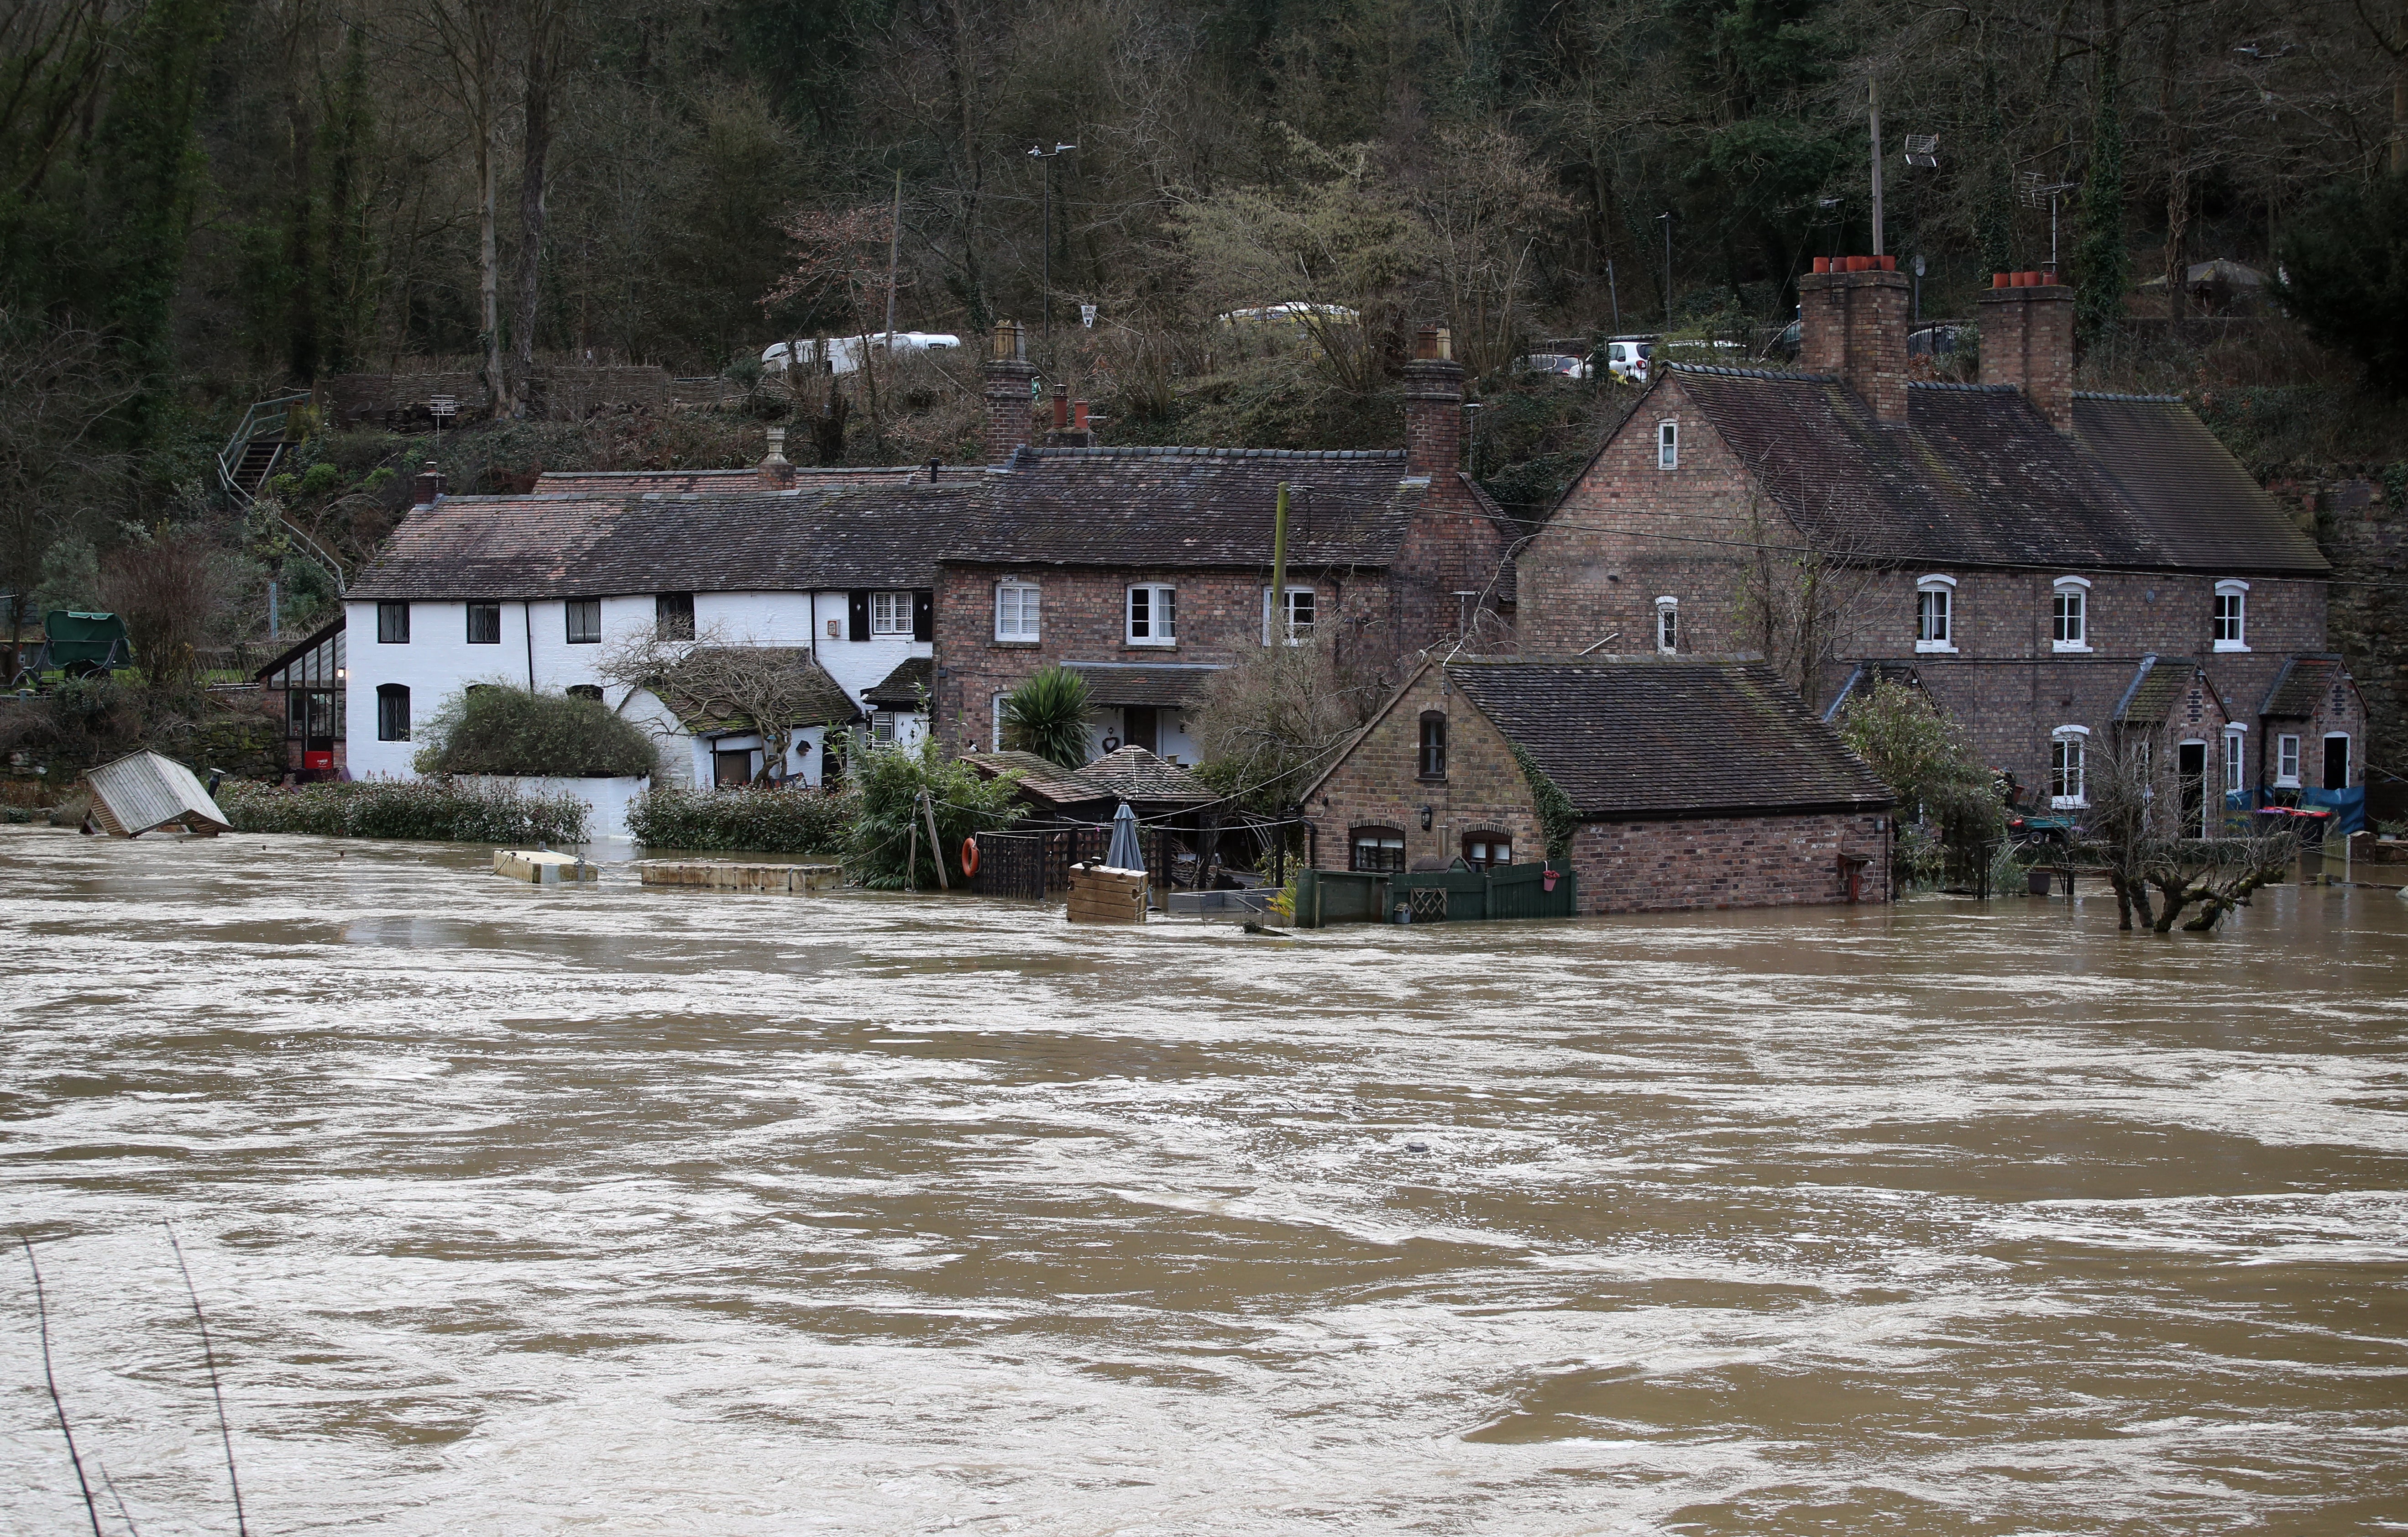 The Vic Haddock boat house under water on the River Severn following high winds and wet weather in Ironbridge, Shropshire